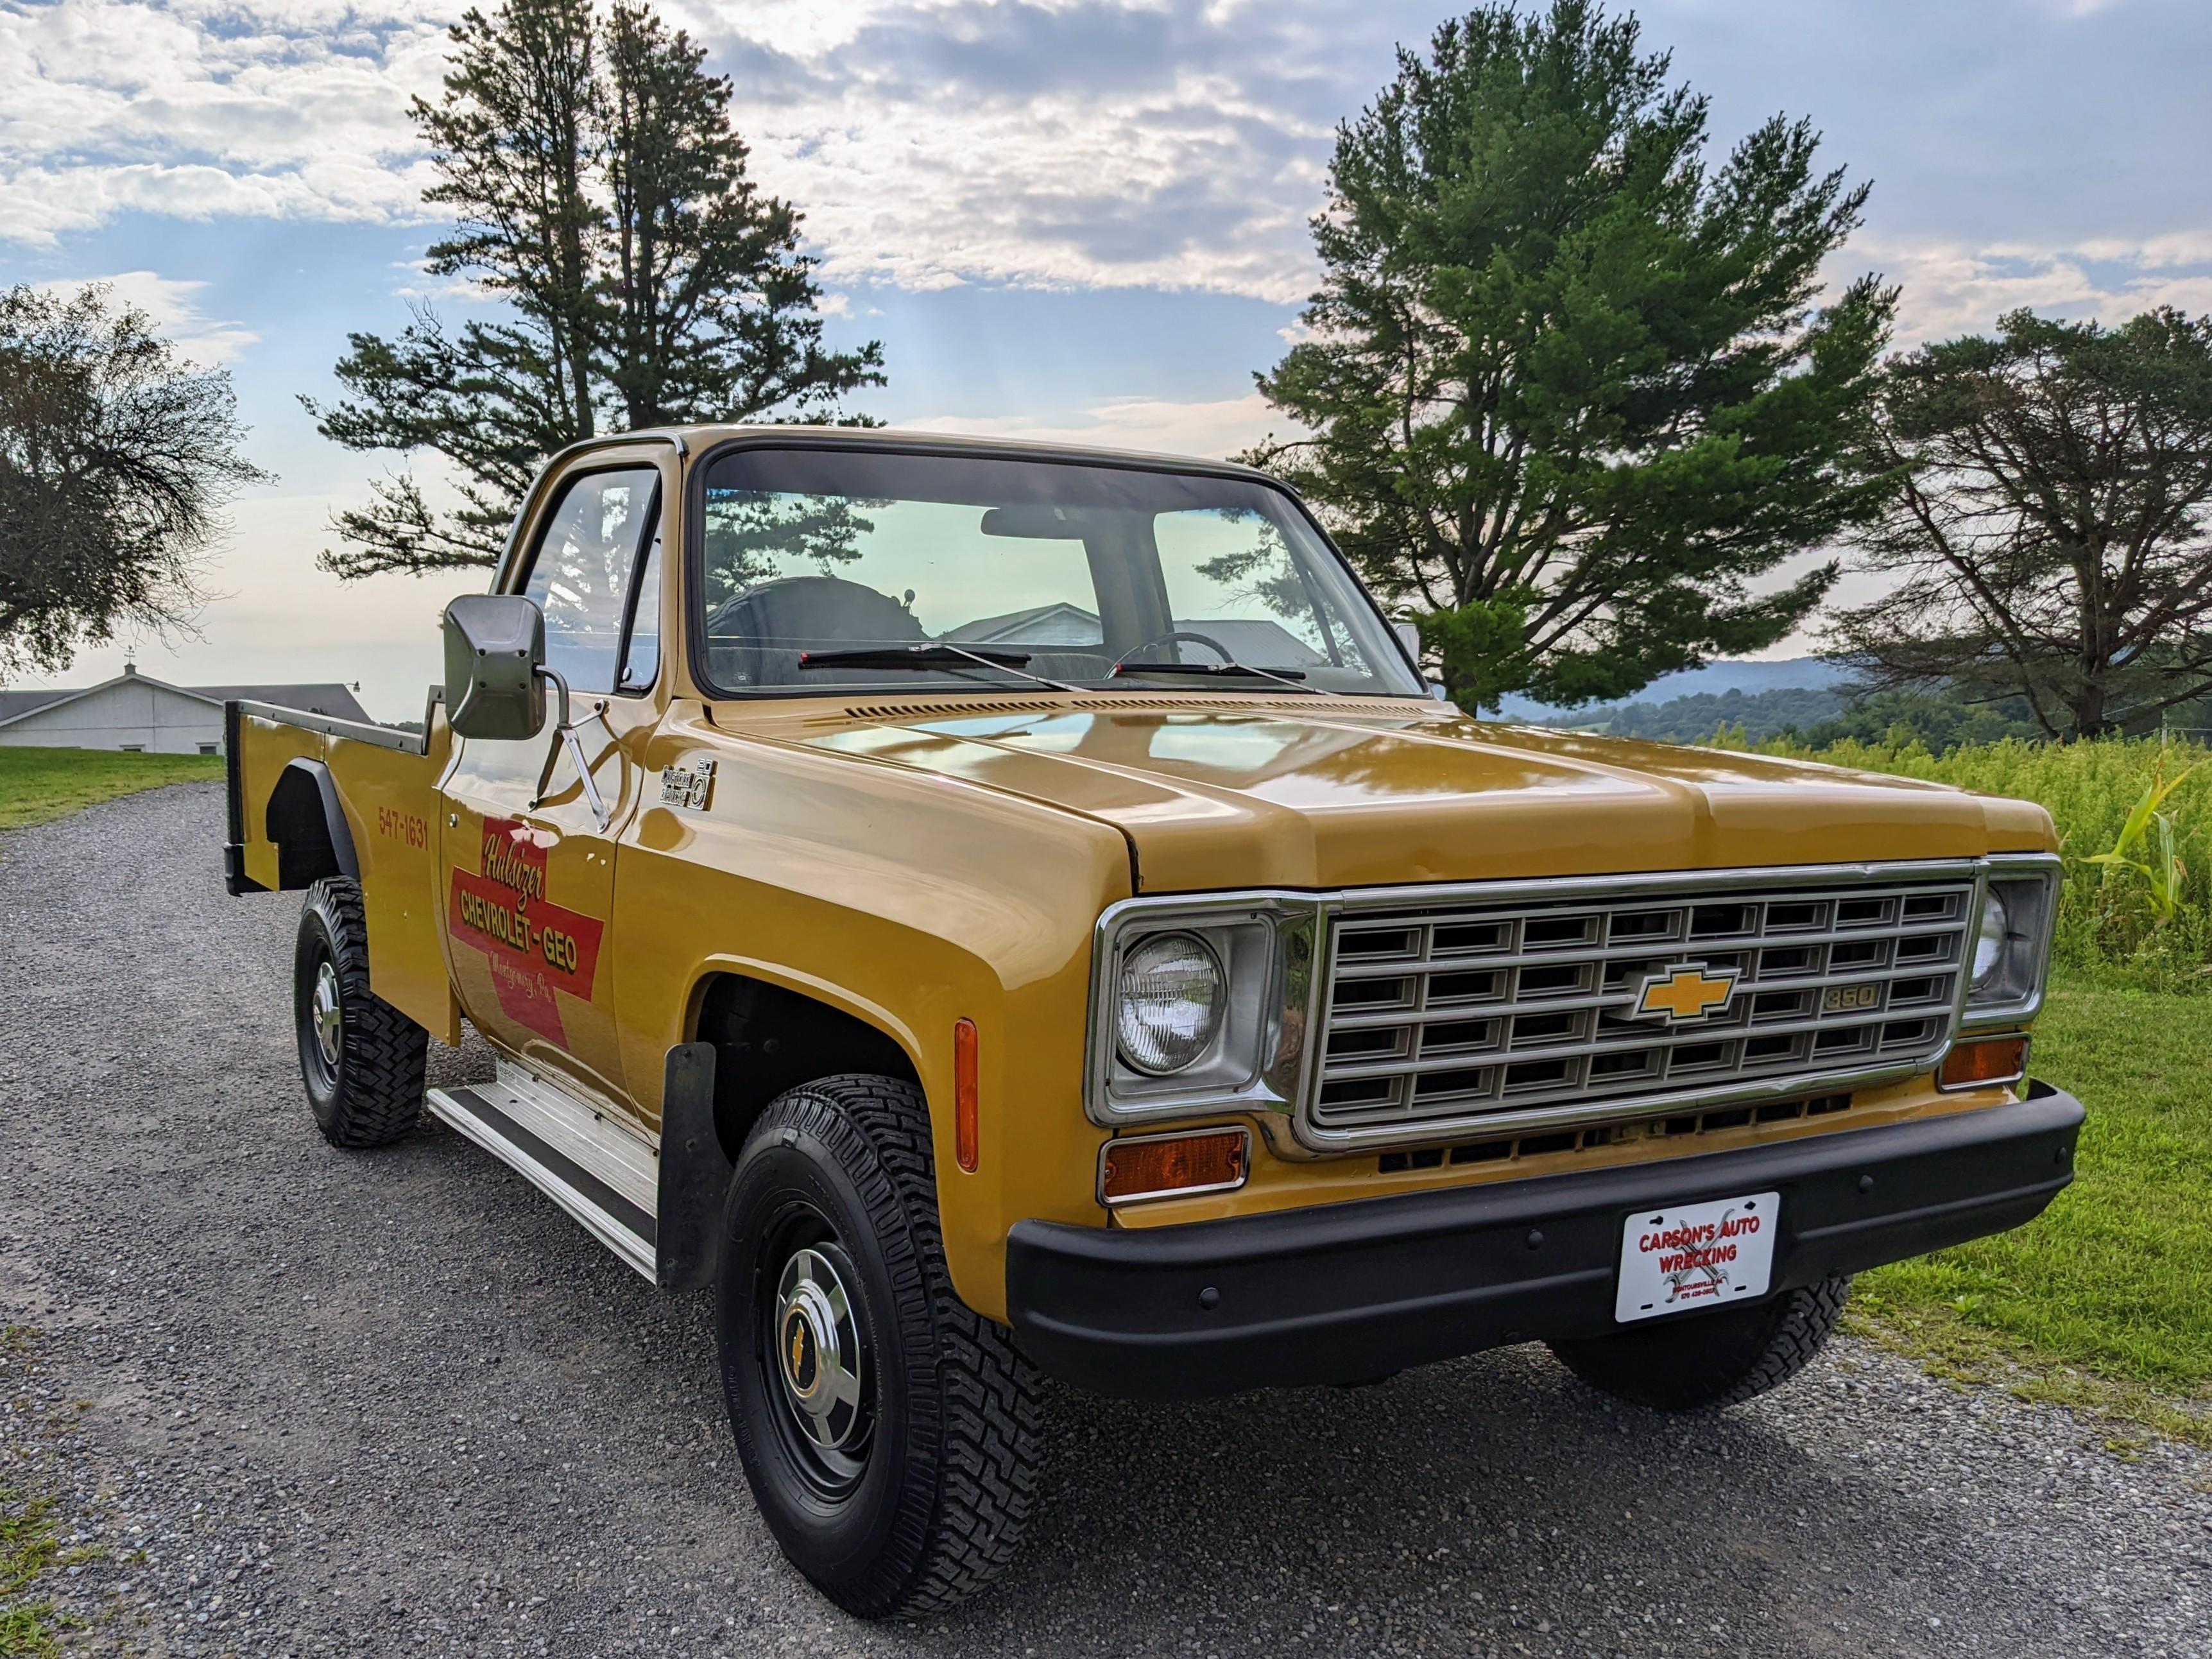 1975 Chevrolet C20 Custom Deluxe Truck. 4x4 cool old shop truck. V8, automa